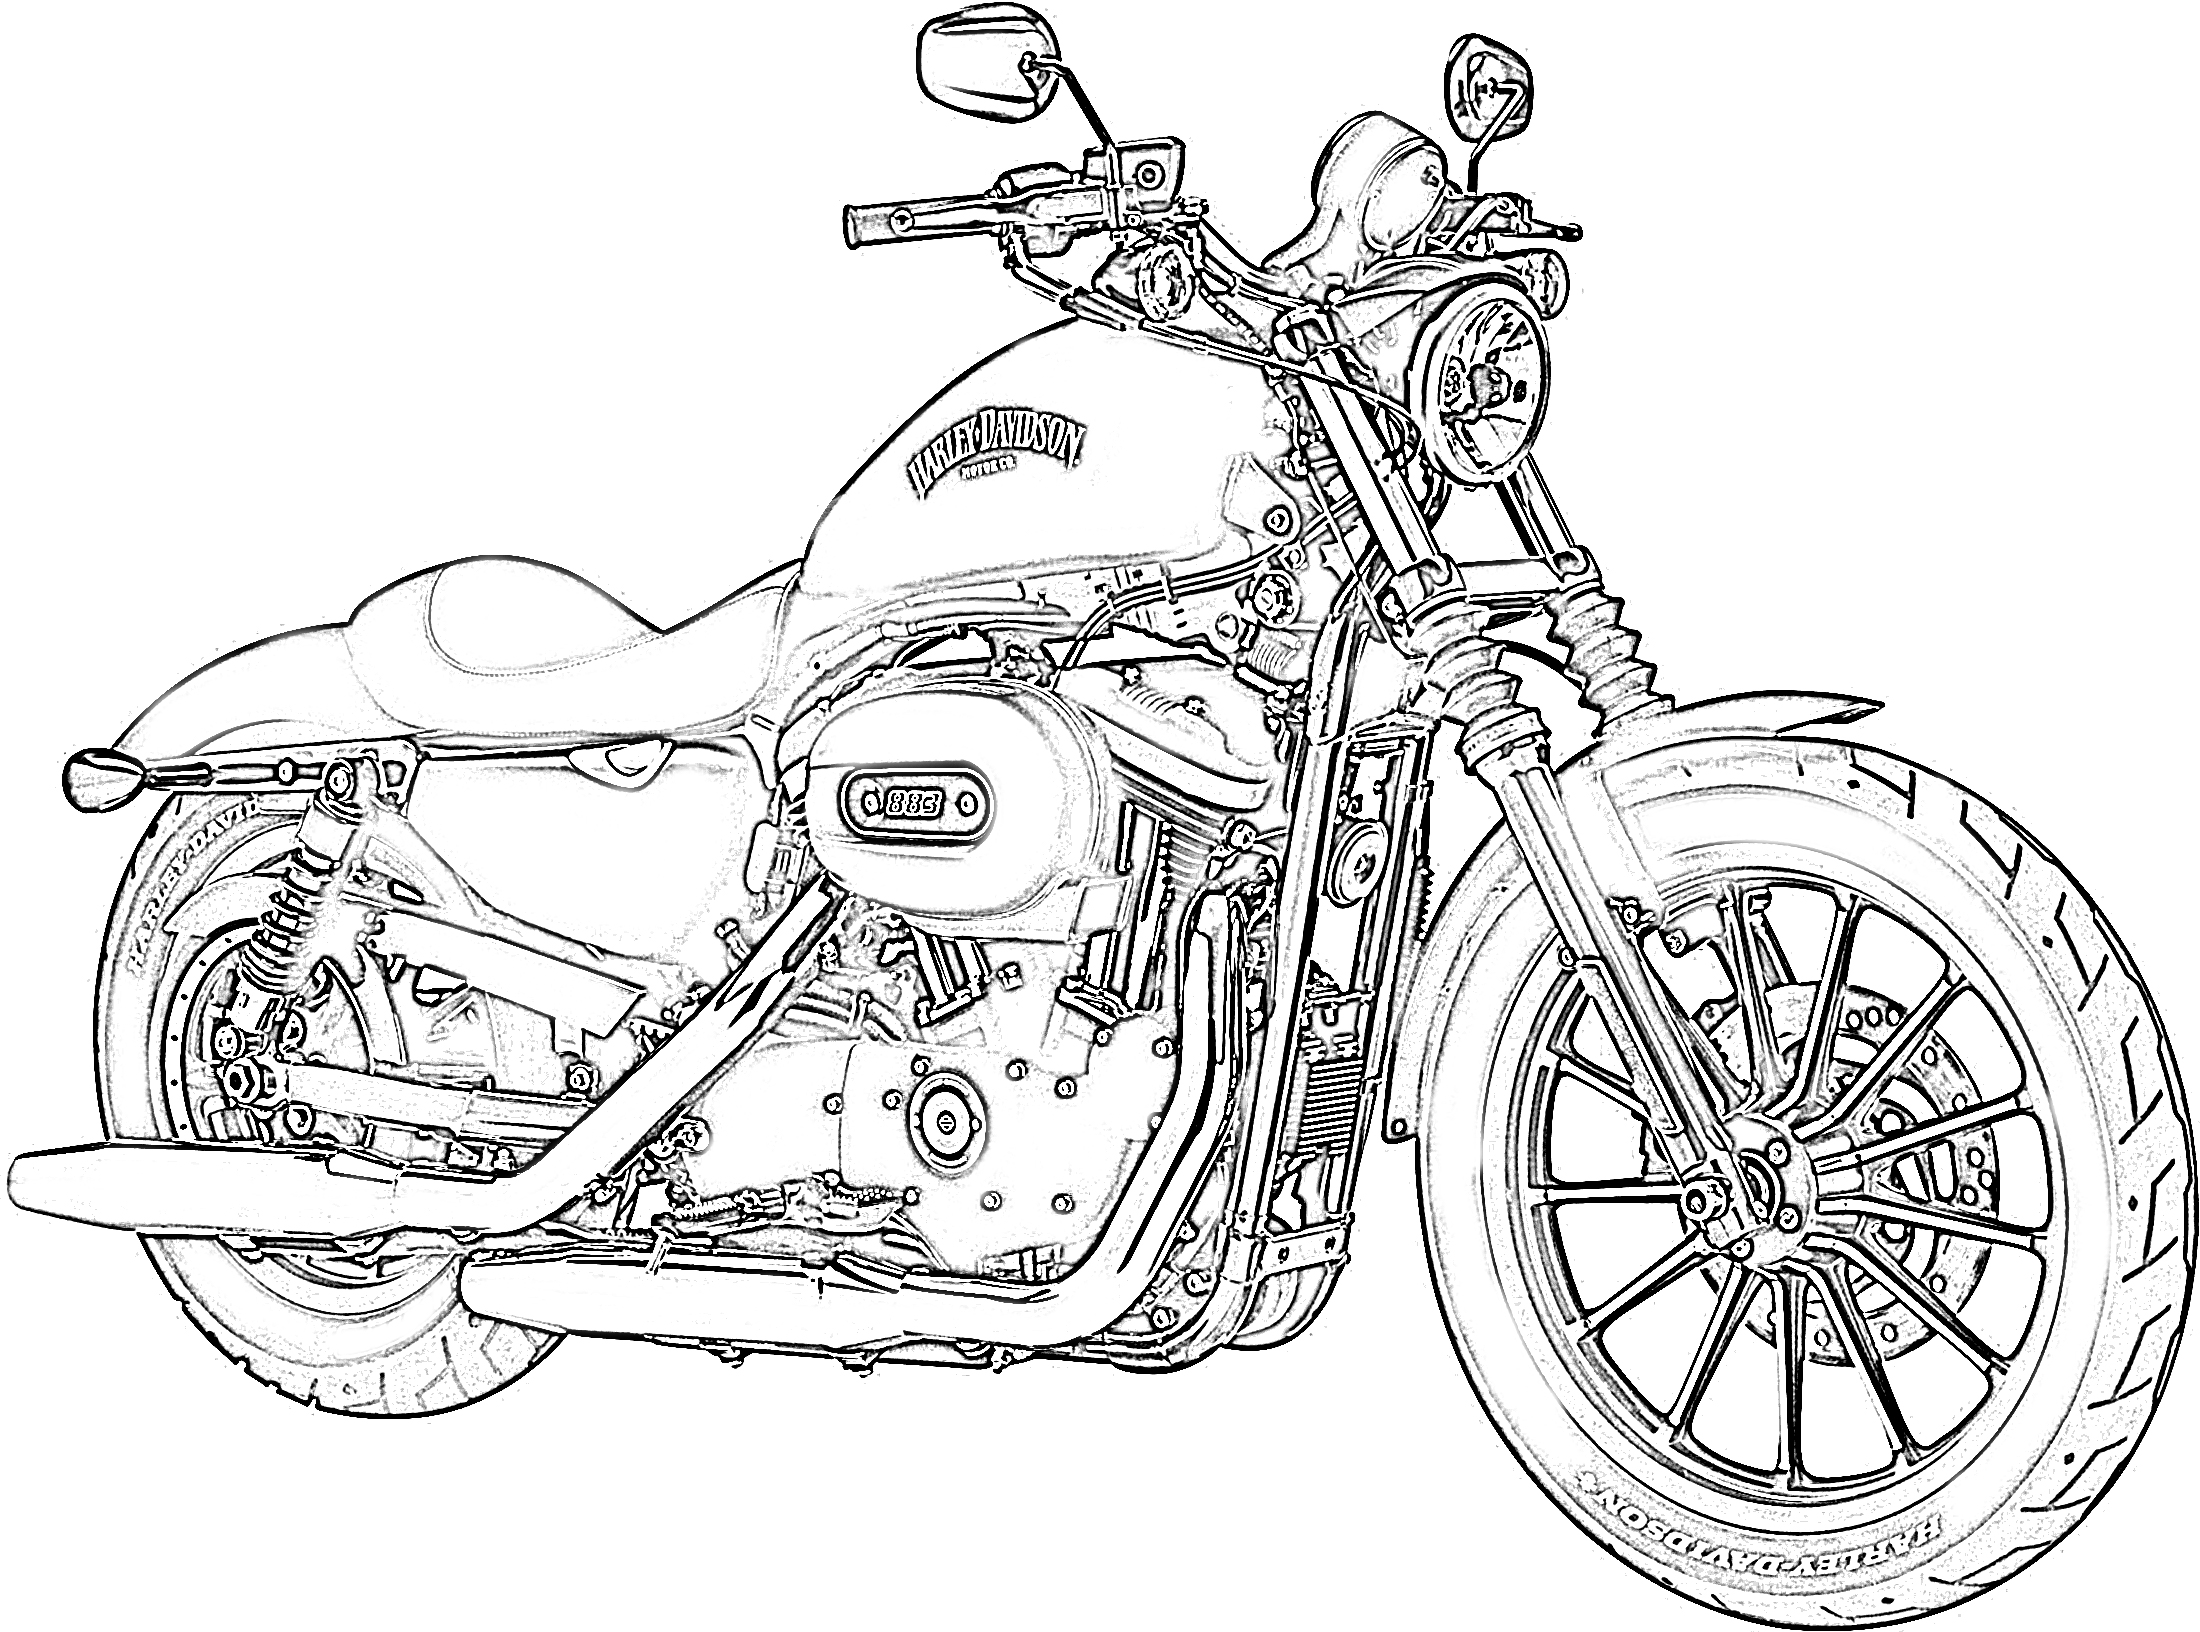 Coloring Motorcycle Harley Davidson Template Sketch Coloring Page.